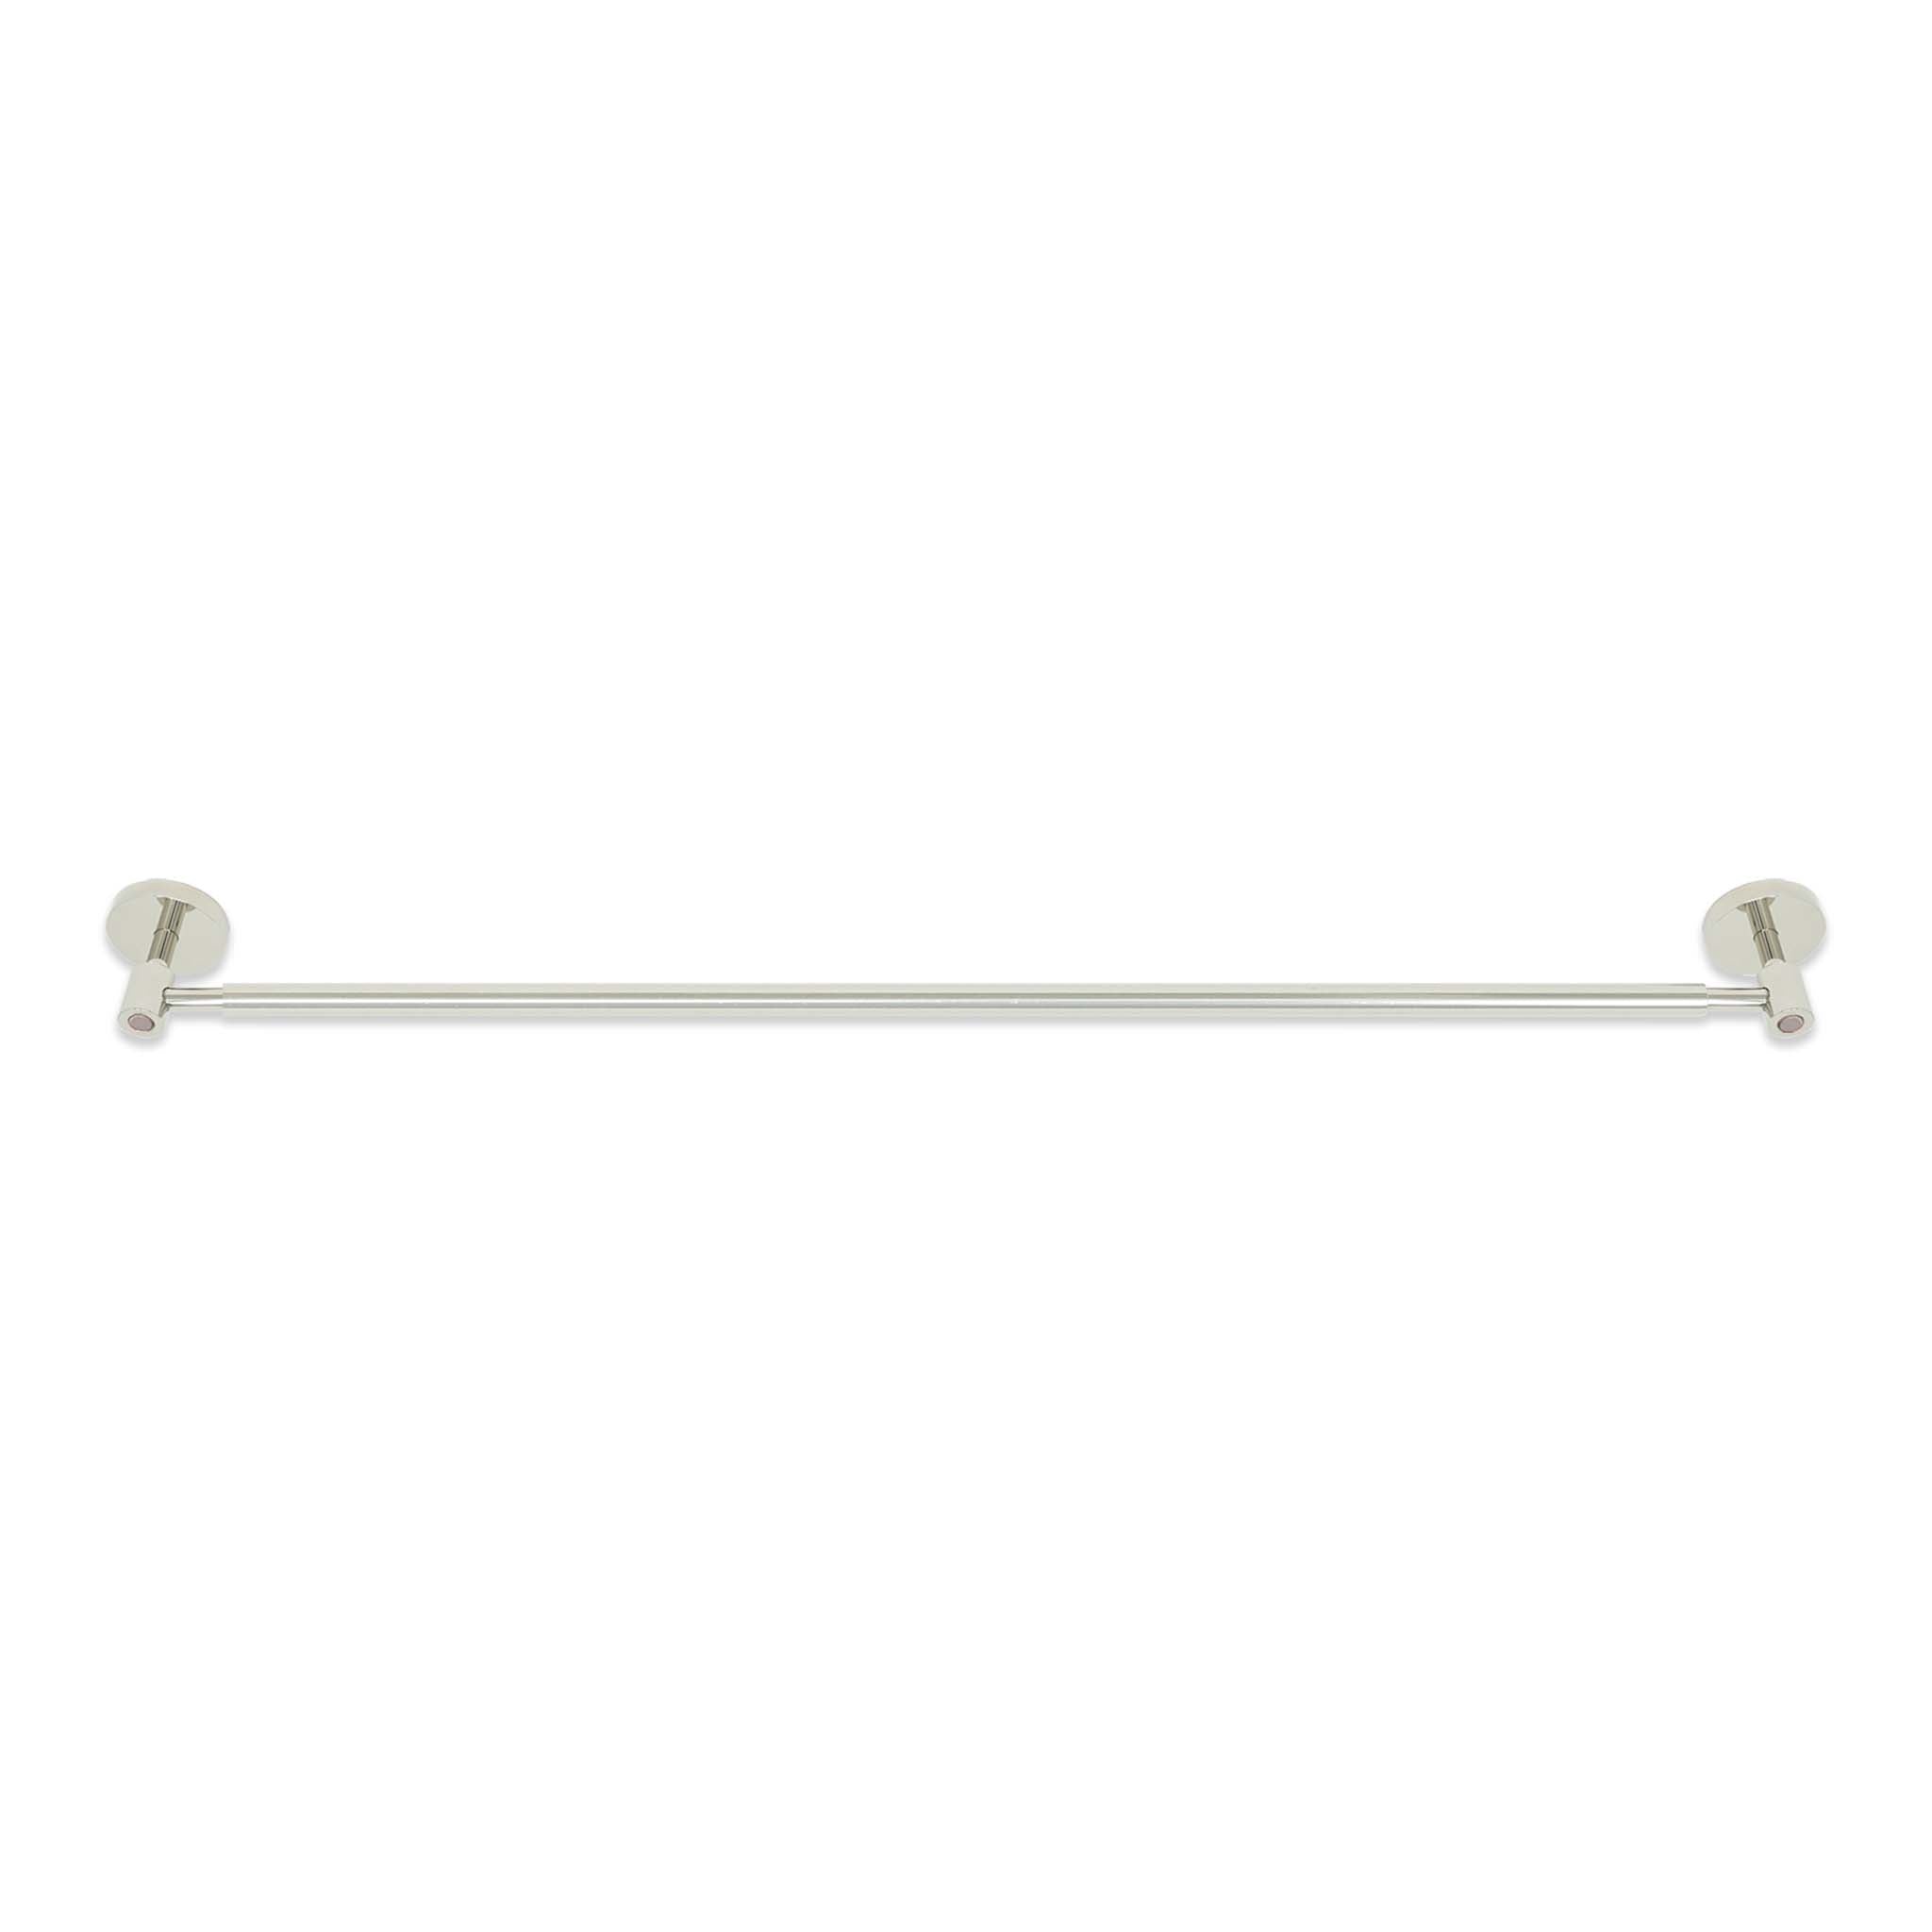 Nickel and barely color Head towel bar 24" Dutton Brown hardware